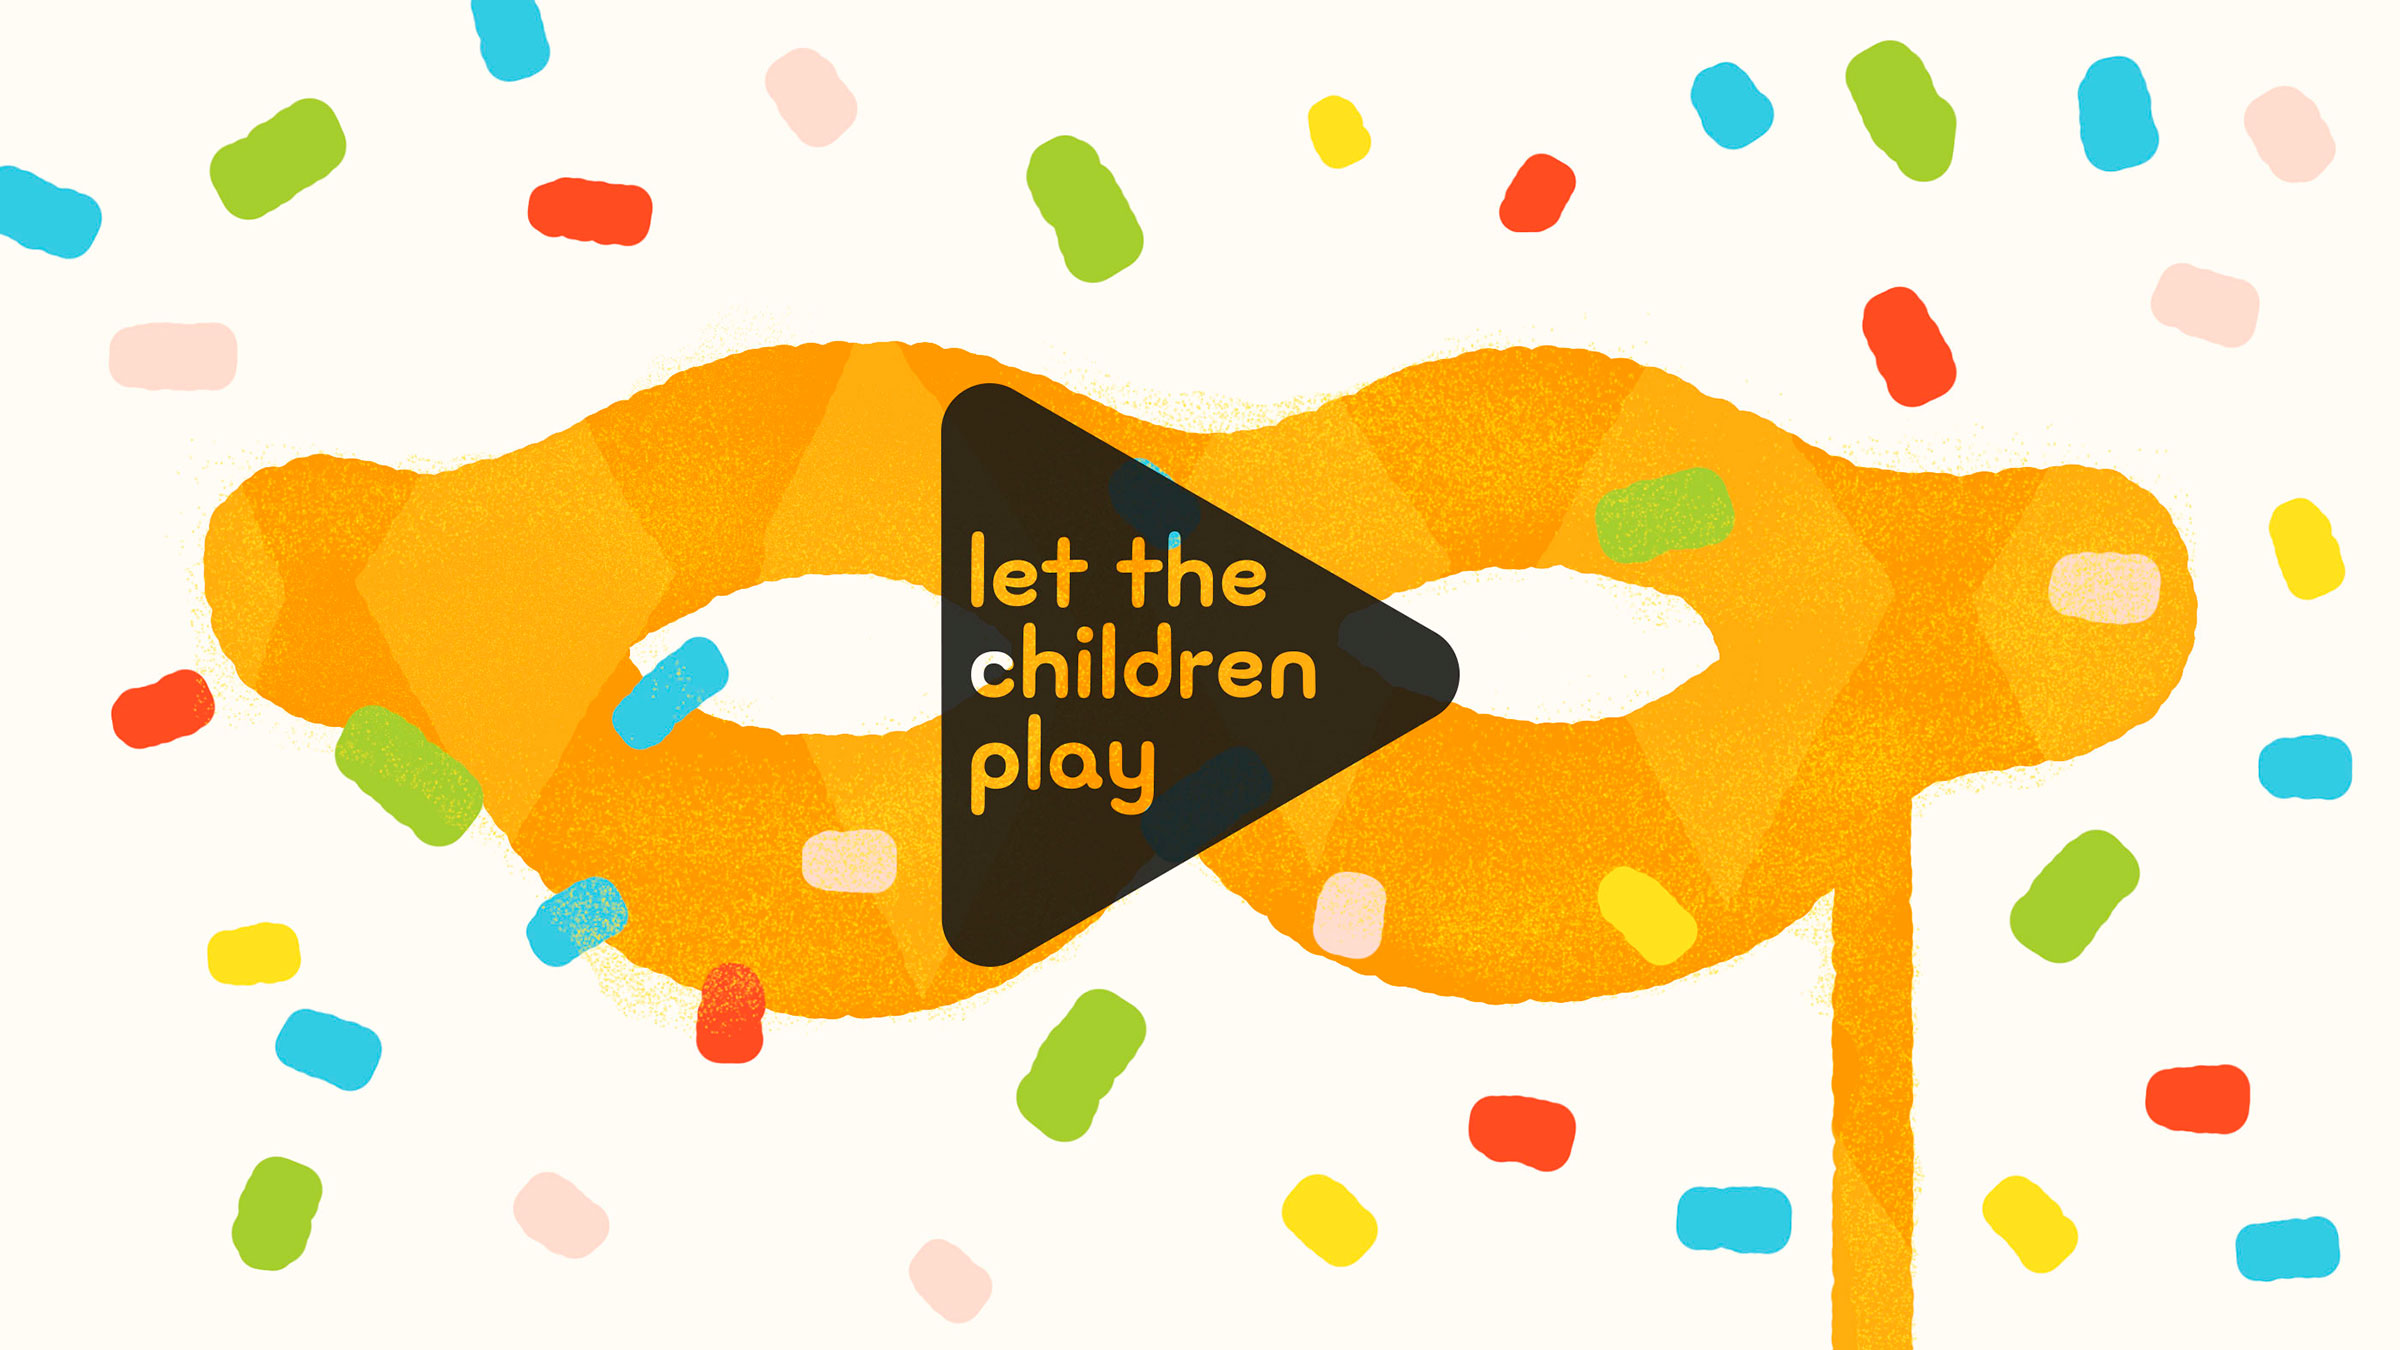 RPS - Let the children play - Carnival